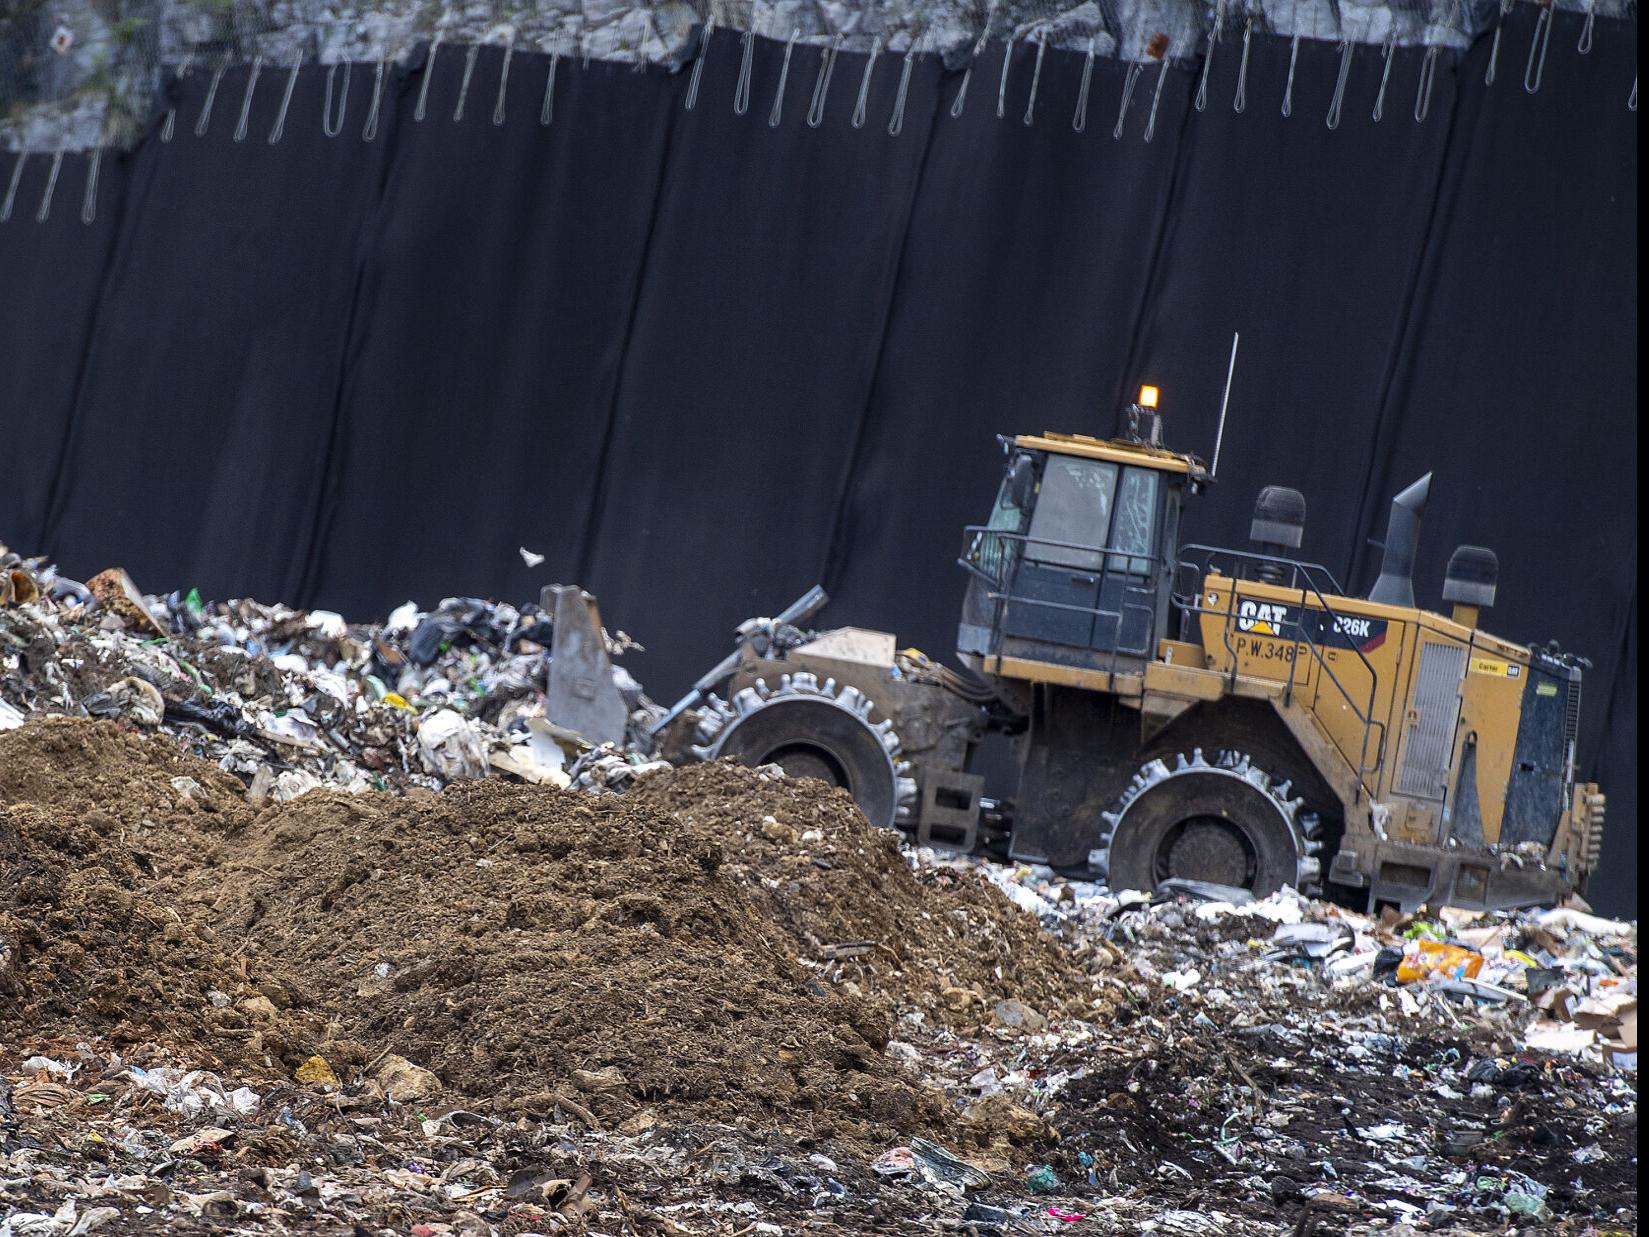 Bvu Wastewater From Landfill Violating Permit For Benzene Levels Latest Headlines Heraldcourier Com